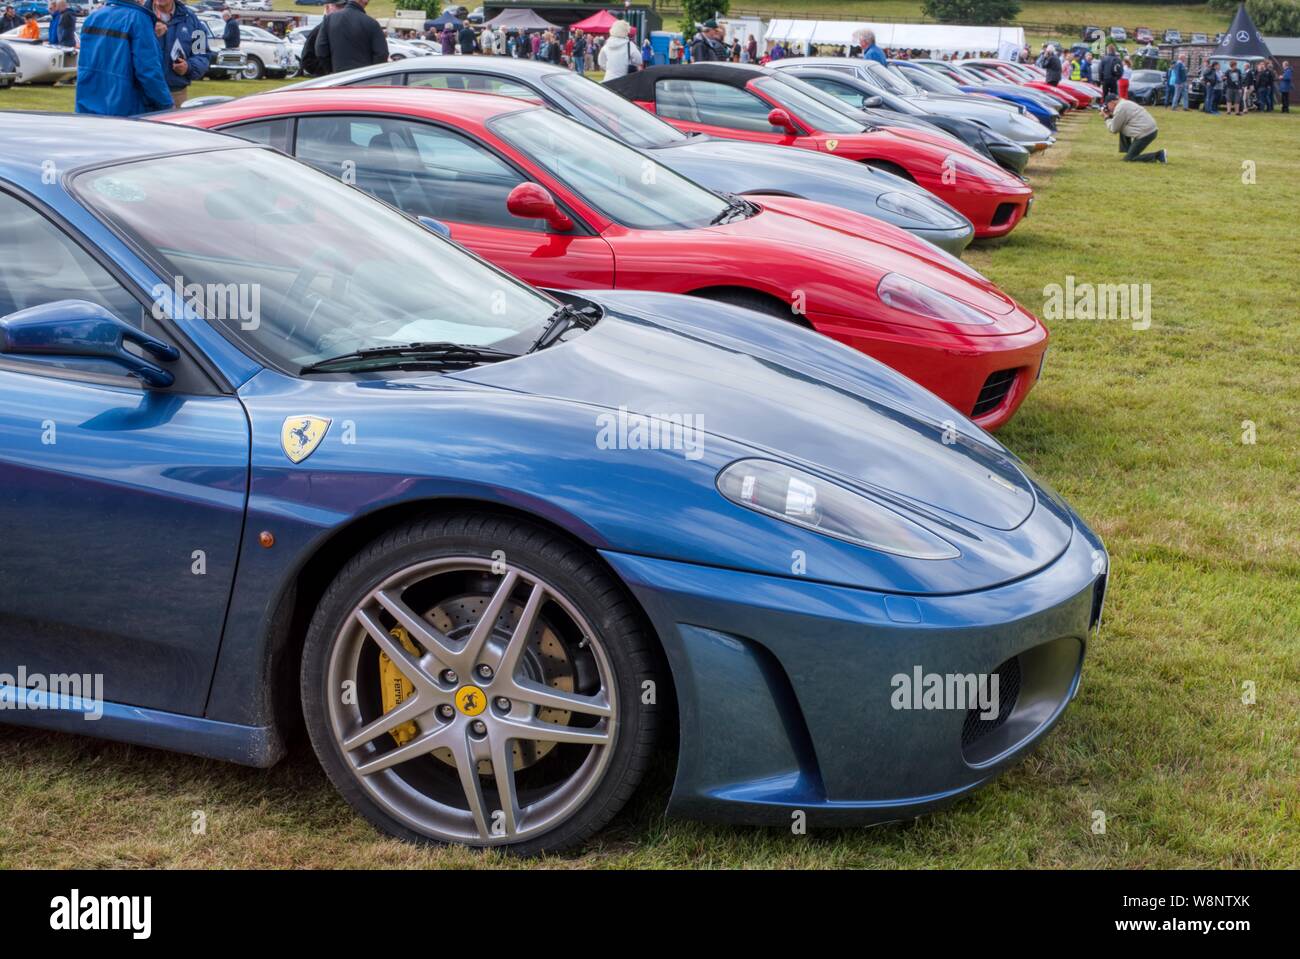 A line of Ferraris at a car show staged by Robert and Tanya Lewis at Old Kiln Farm, Churt, Surrey, UK Stock Photo